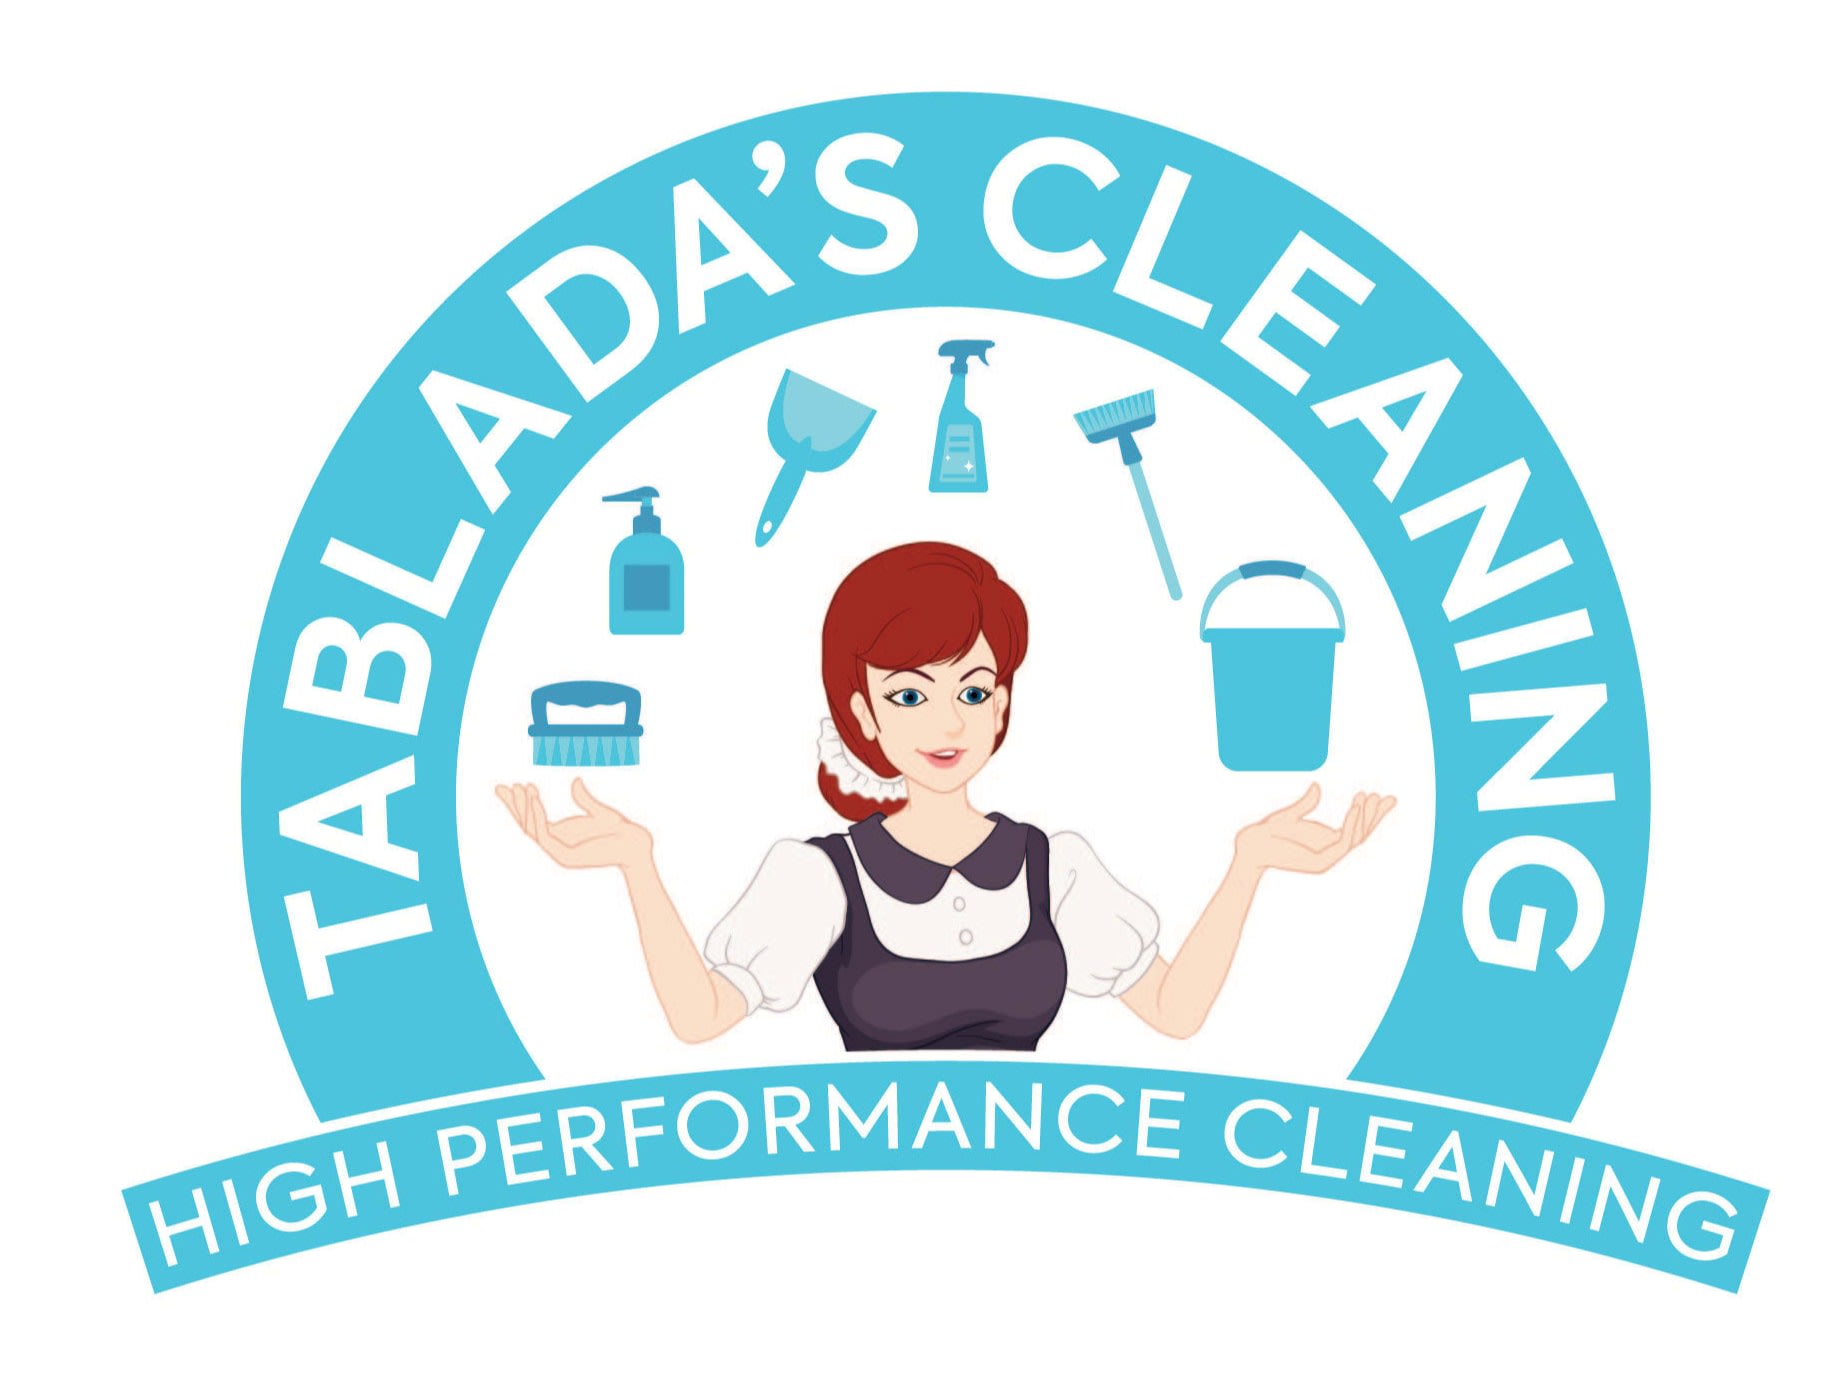 Tablada’s Cleaning